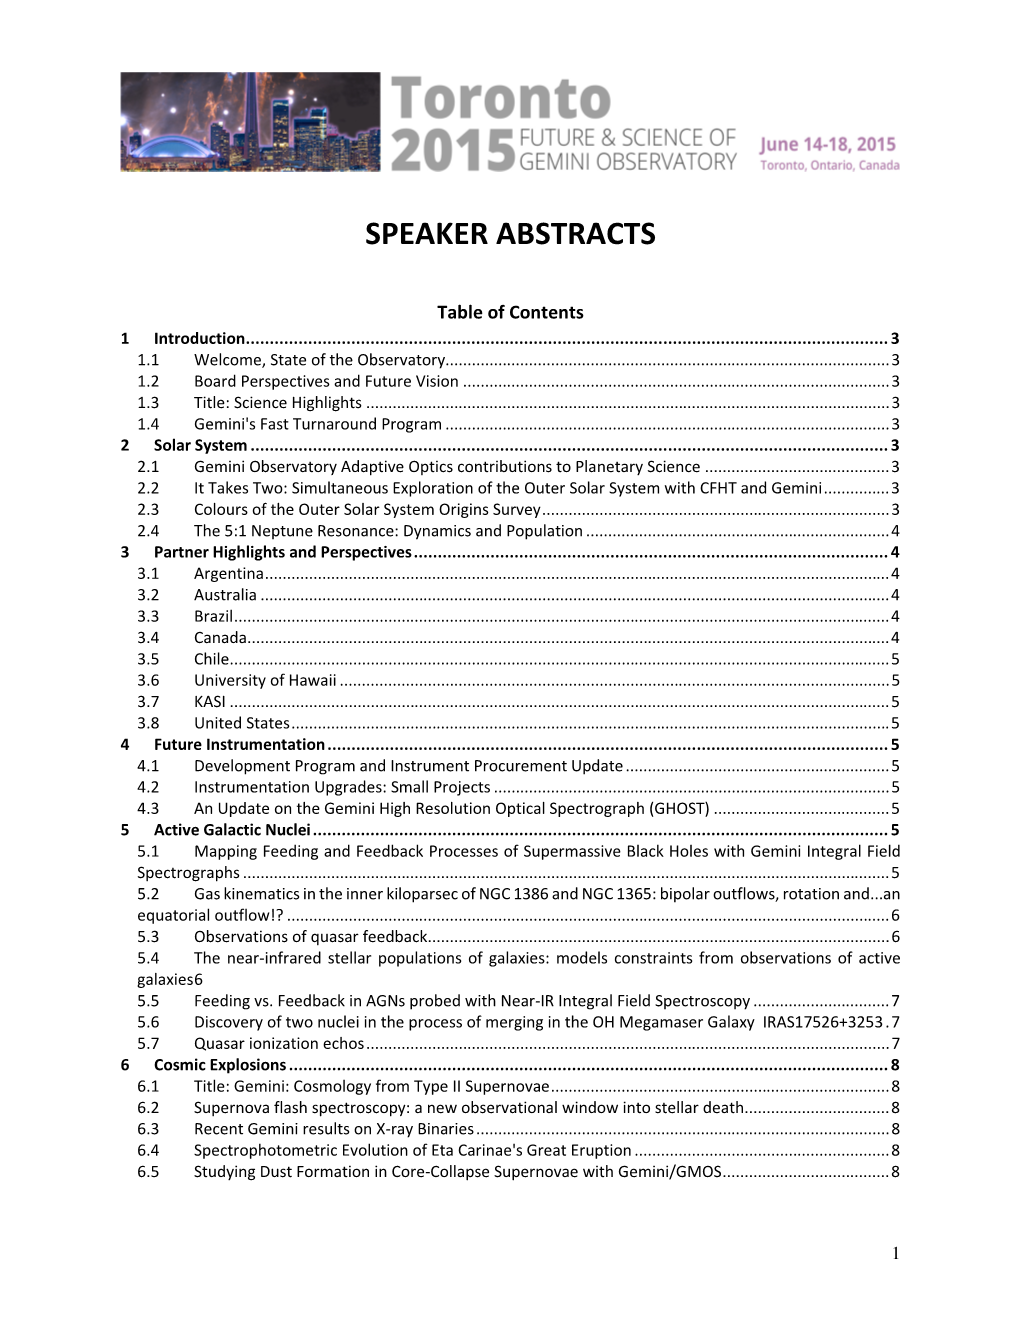 Speaker Abstracts